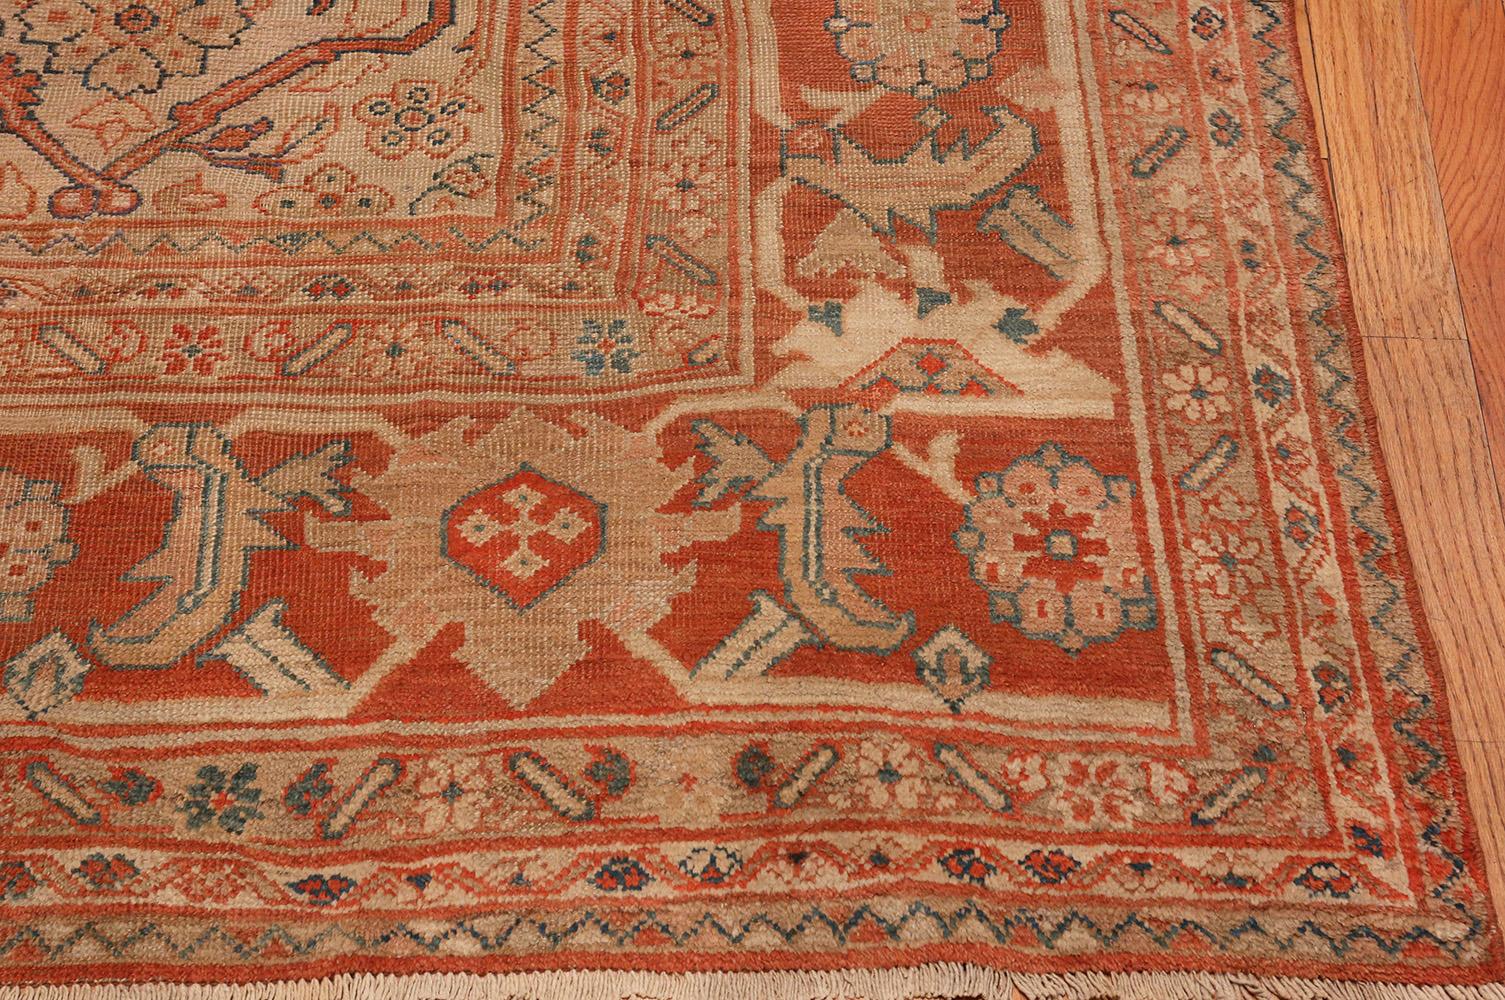 19th Century Nazmiyal Collection Antique Persian Sultanabad Rug. Size: 8 ft 10 in x 12 ft